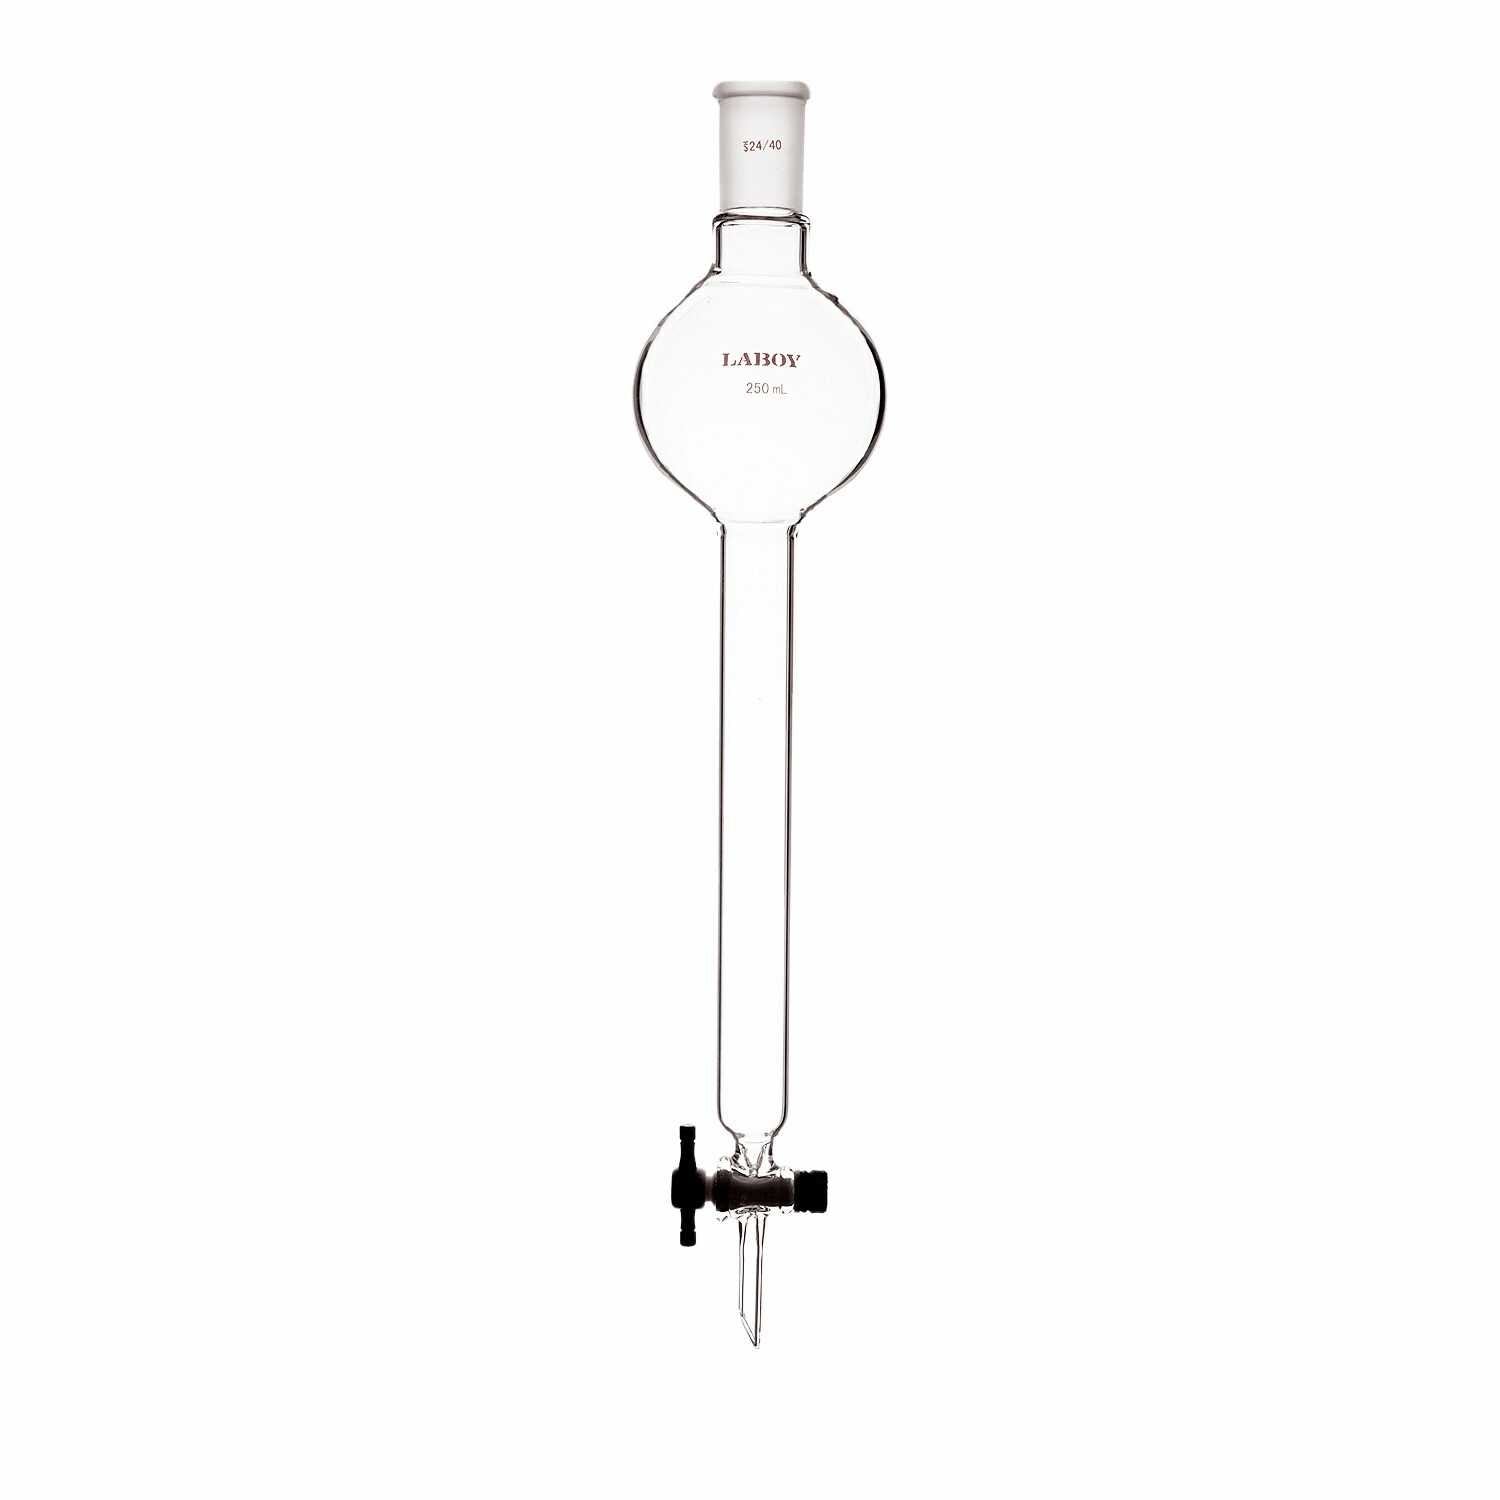 Glass Chromatography Column With Reservior and Taper Joint - Scienmart